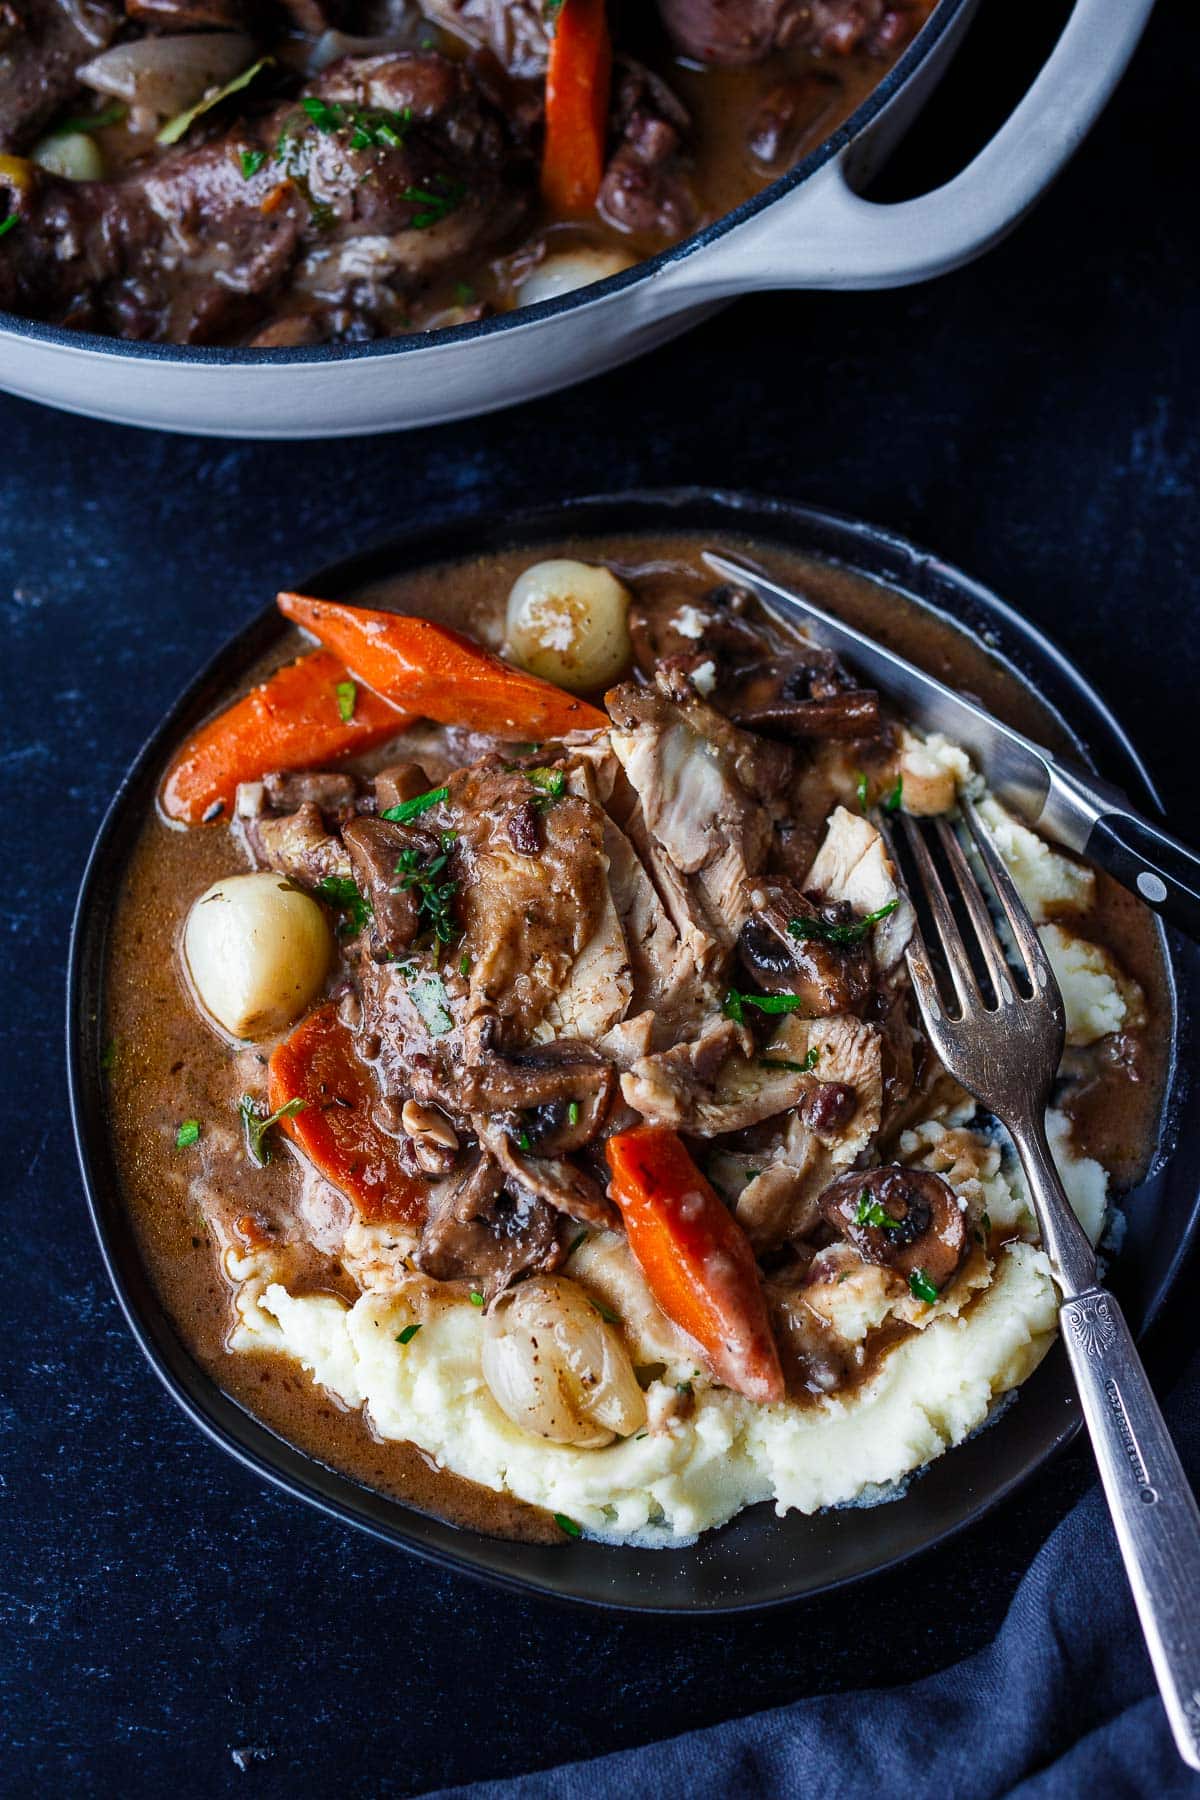 plate with coq au vin served over mashed potatoes with carrots, pearl onions, and mushrooms- fork cutting in to show tender meat.